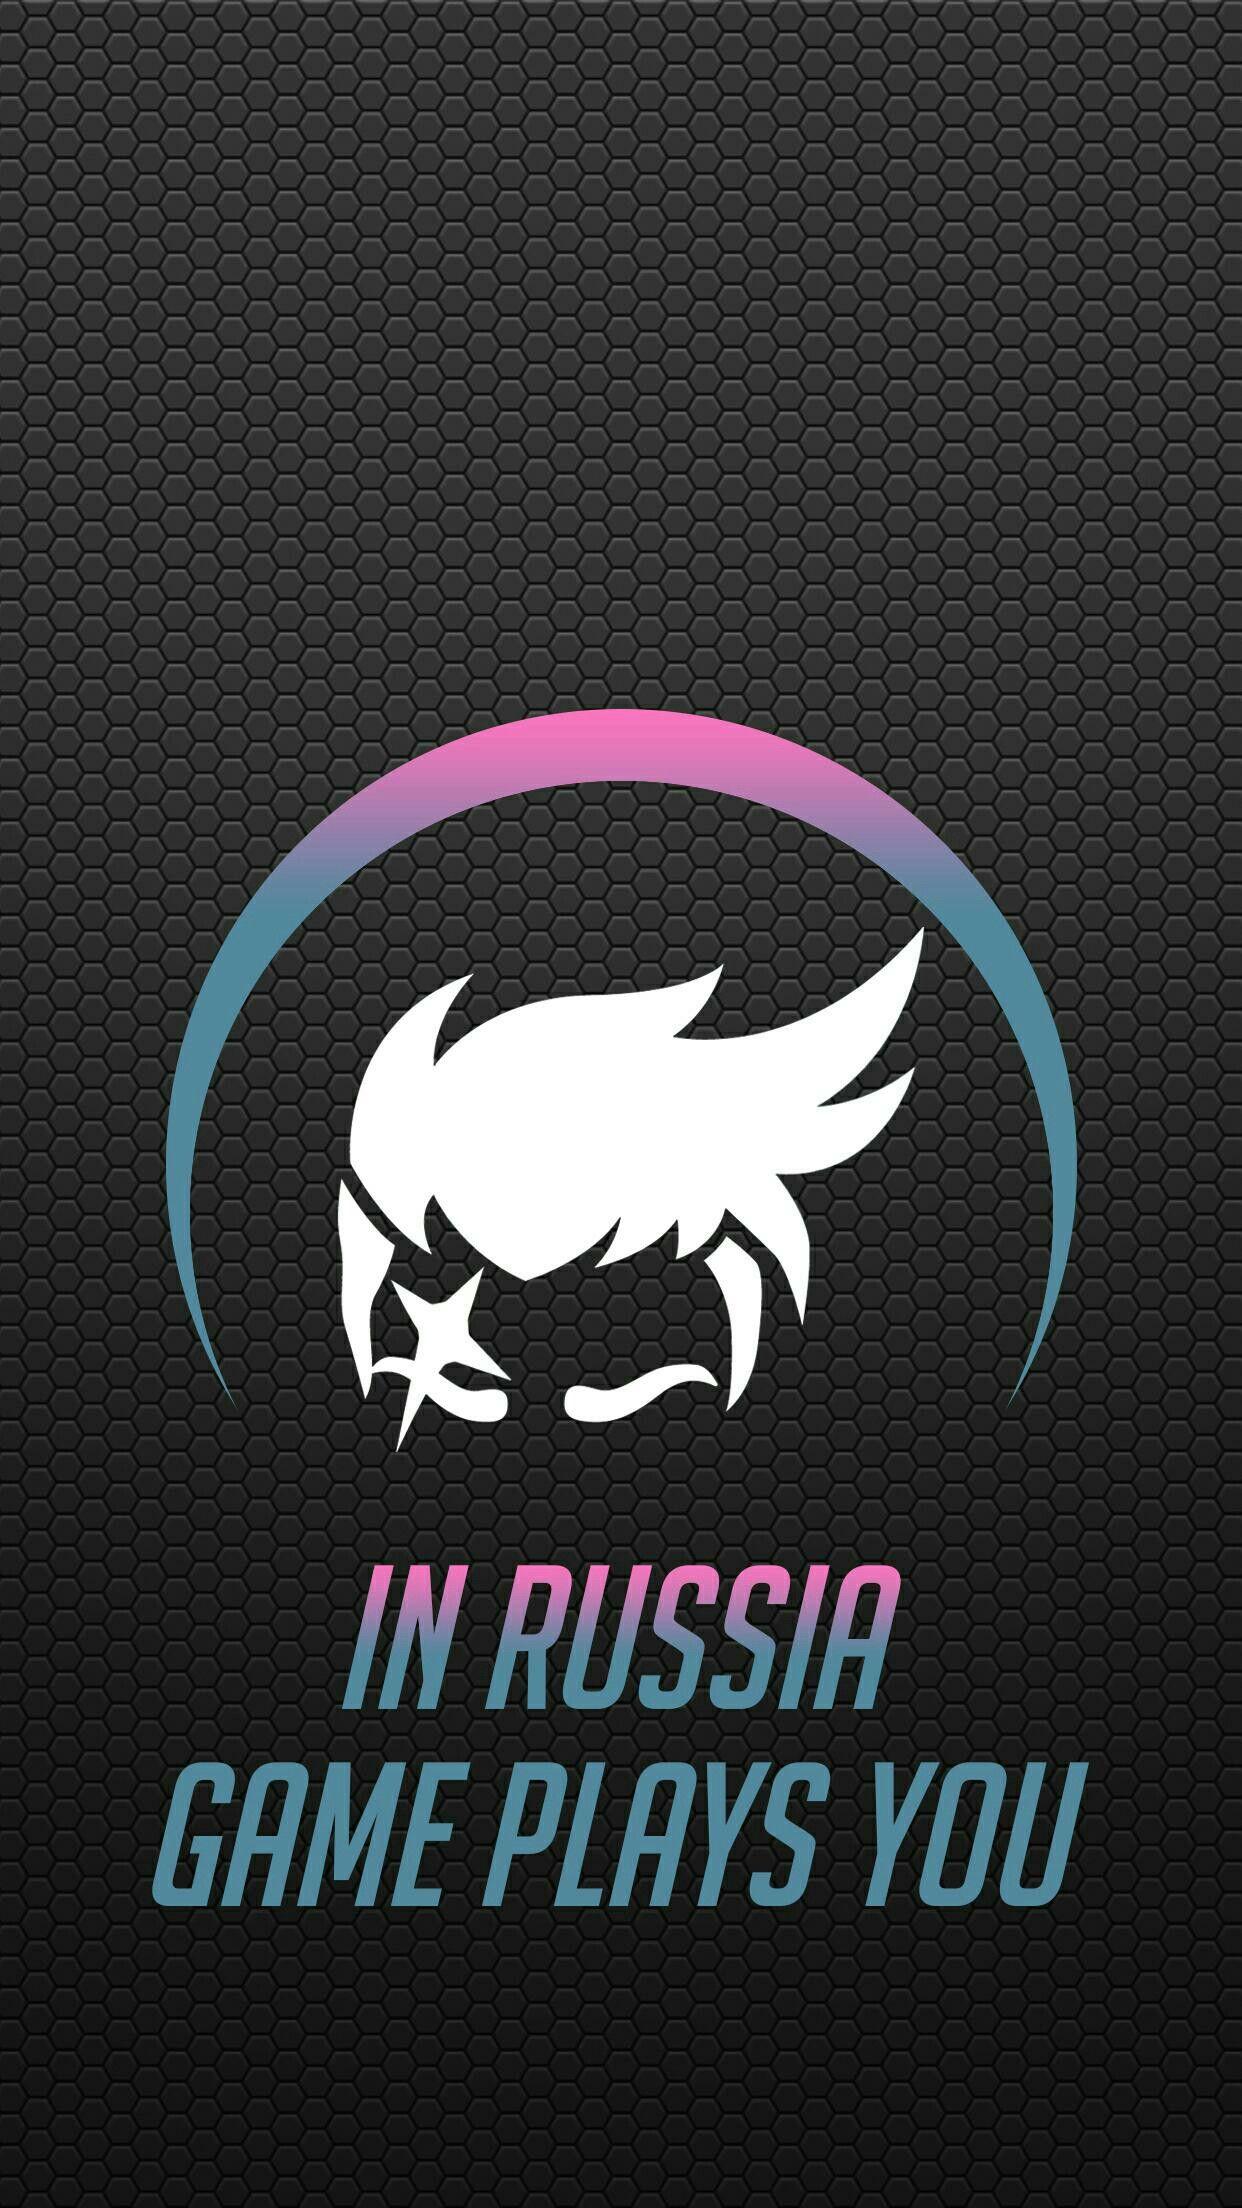 Overwatch Phone Wallpapers Top Free Overwatch Phone Backgrounds Wallpaperaccess